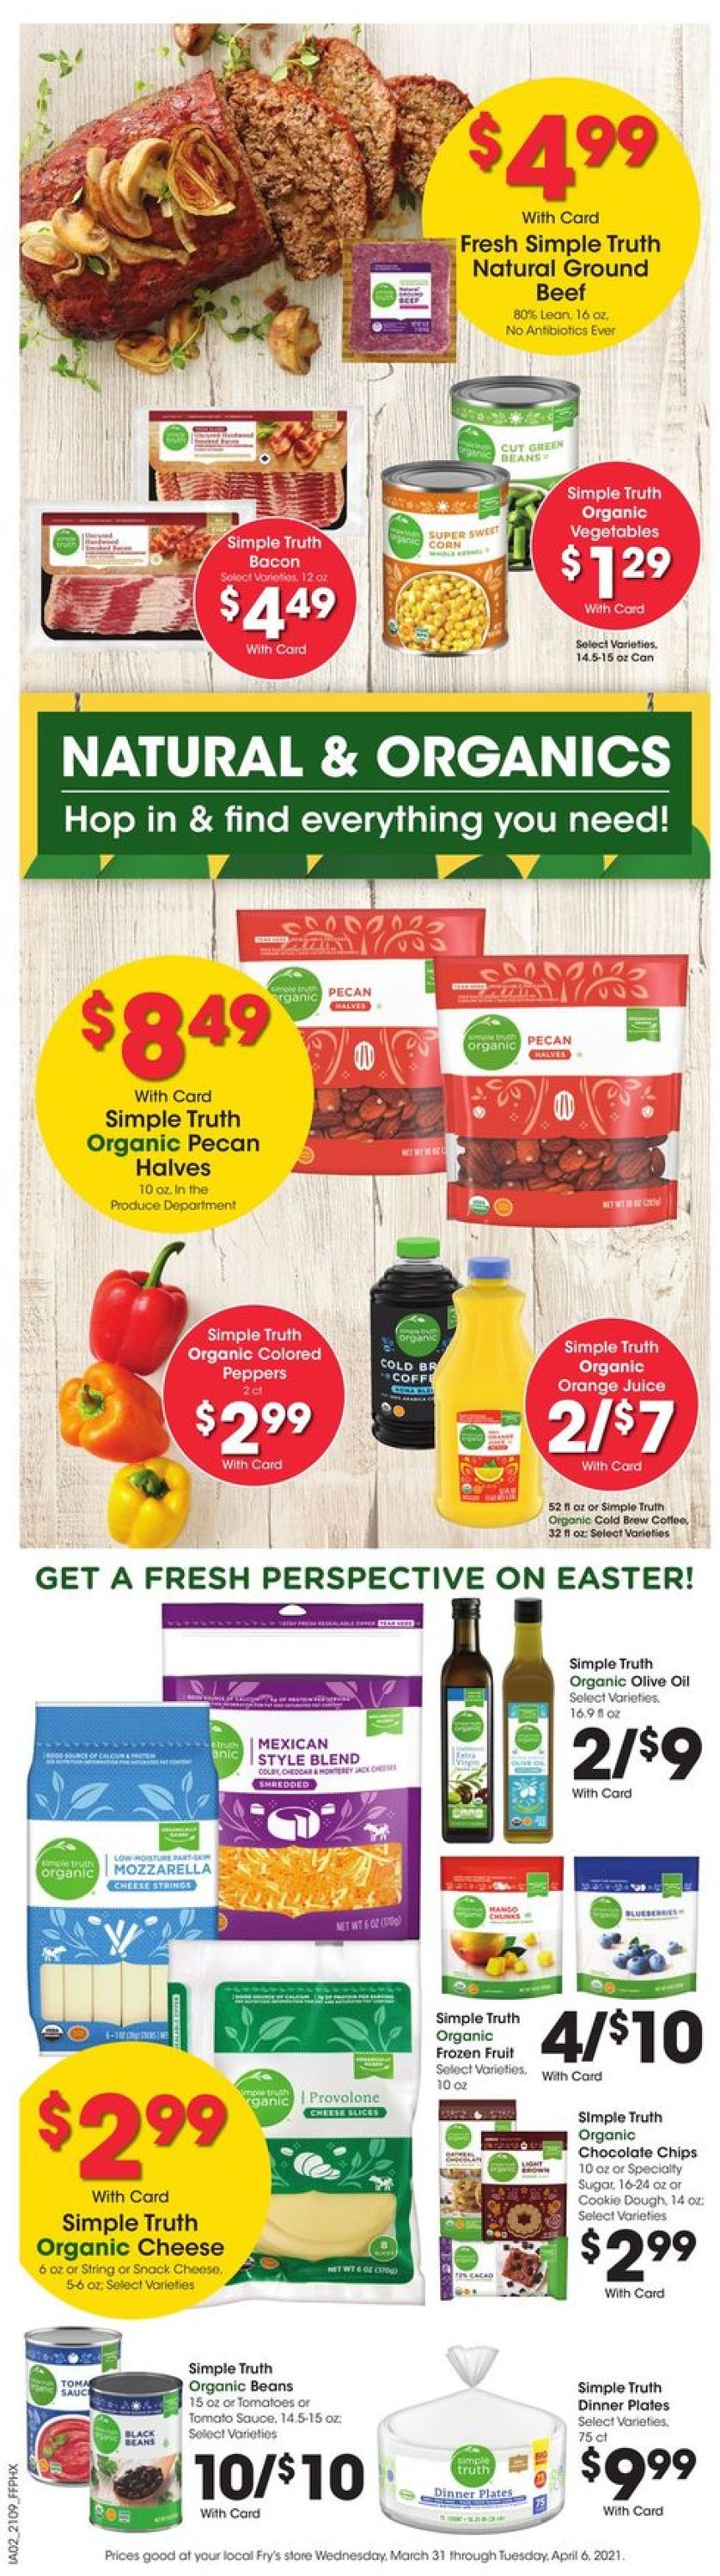 Catalogue Fry’s - Easter 2021 from 03/31/2021